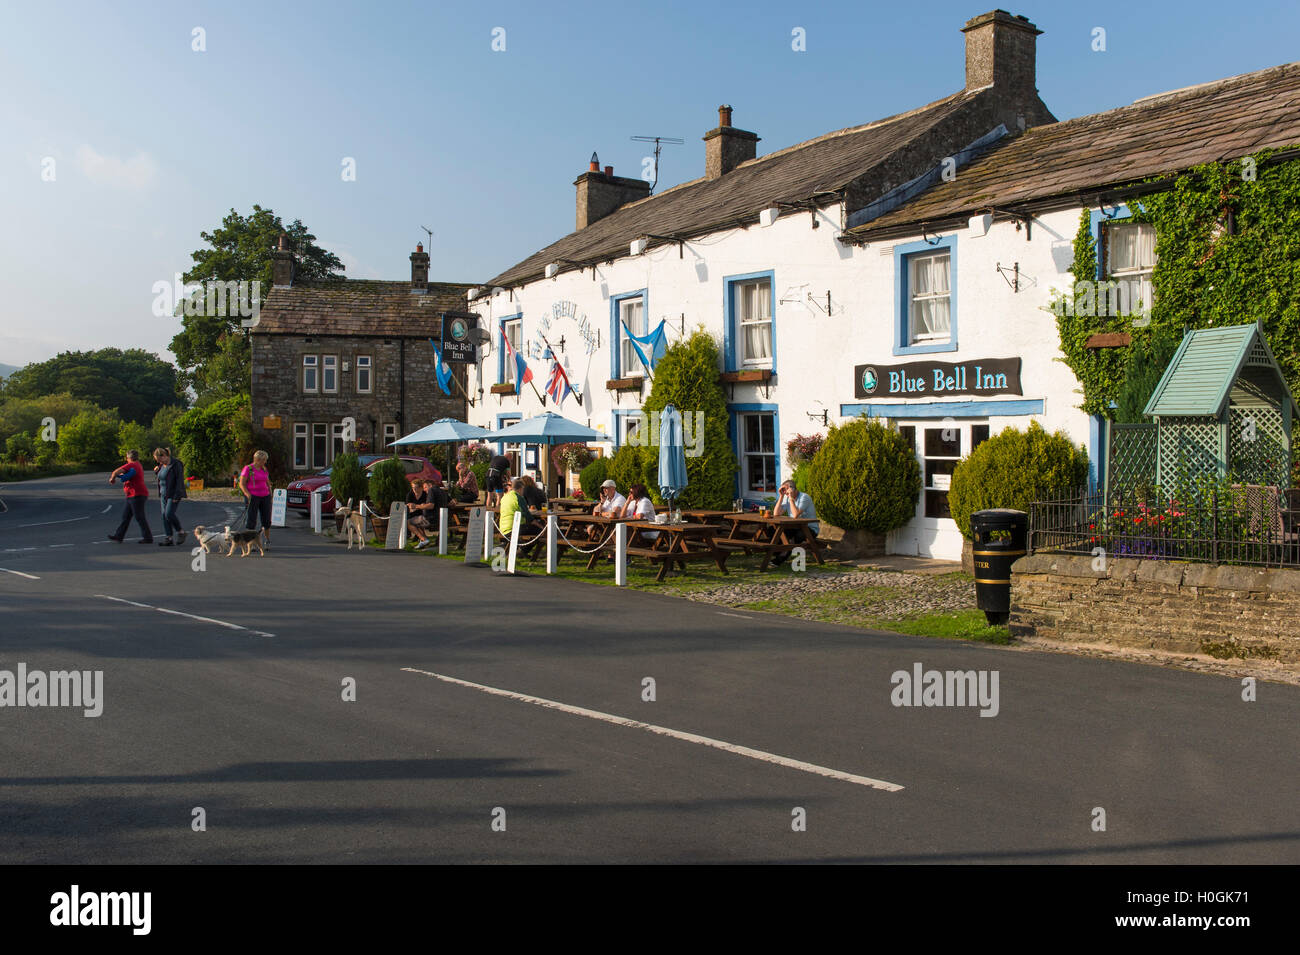 People eat & drink al fresco in the sun at attractive, traditional English pub - The Blue Bell Inn, Kettlewell village, Yorkshire Dales, England, UK. Stock Photo